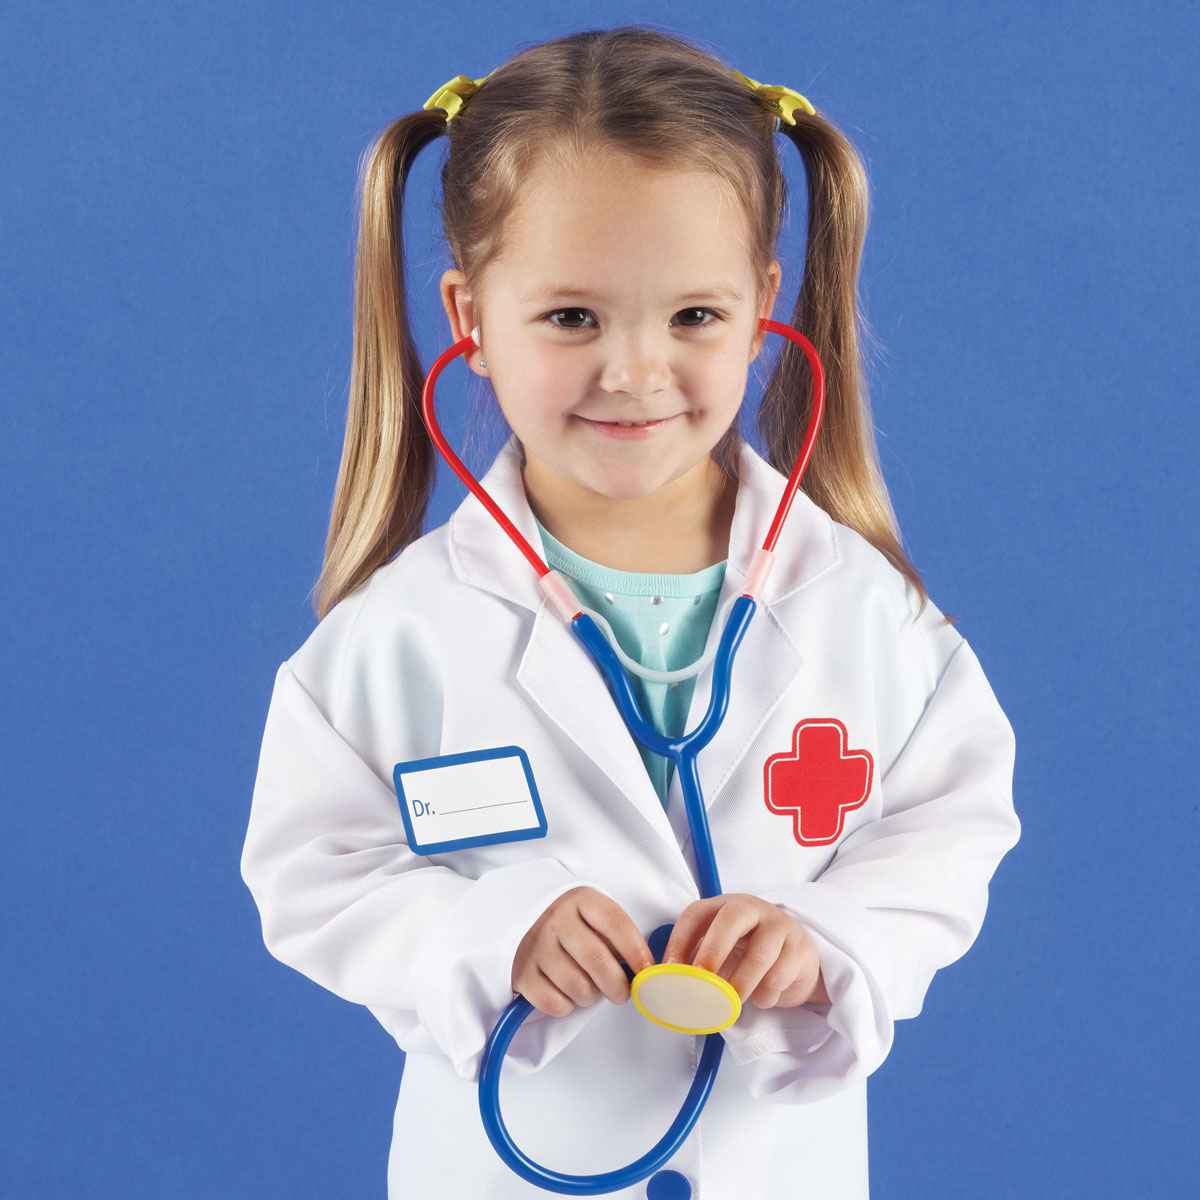 pretend-play-doctor-play-set-by-learning-resources-ler9057